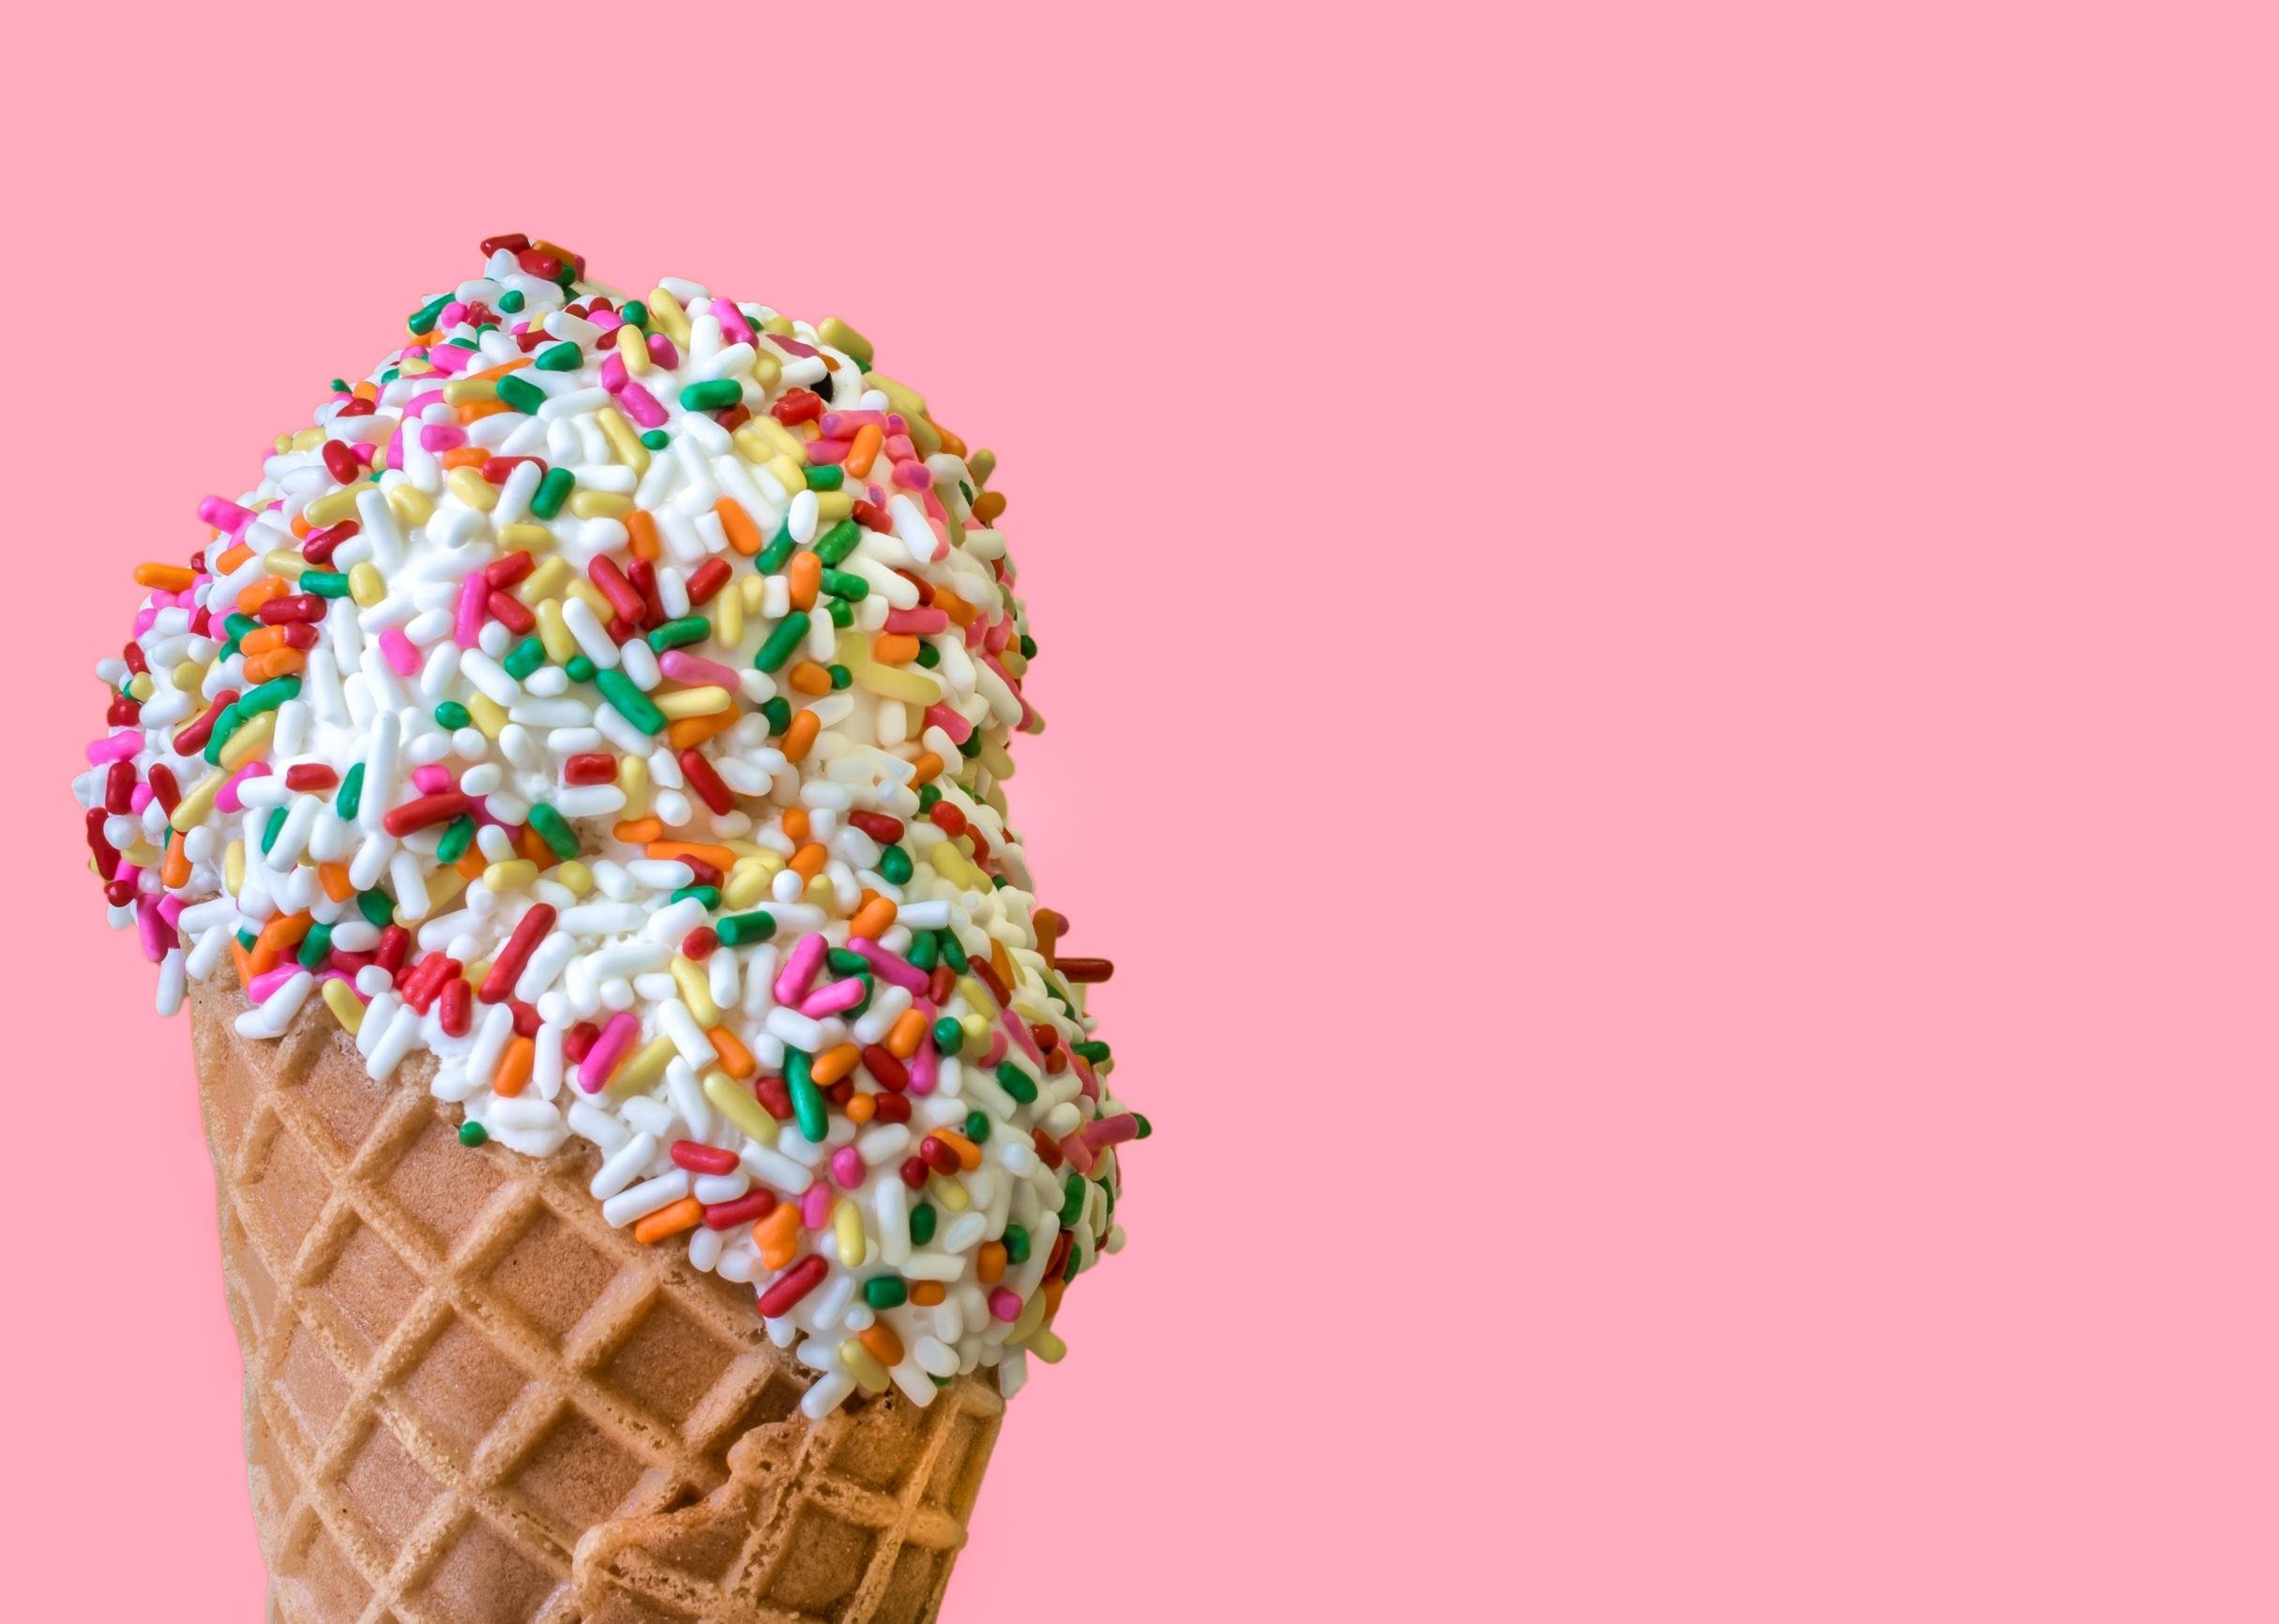 Ice cream scoop with sprinkles in a waffle cone on a light pink background.